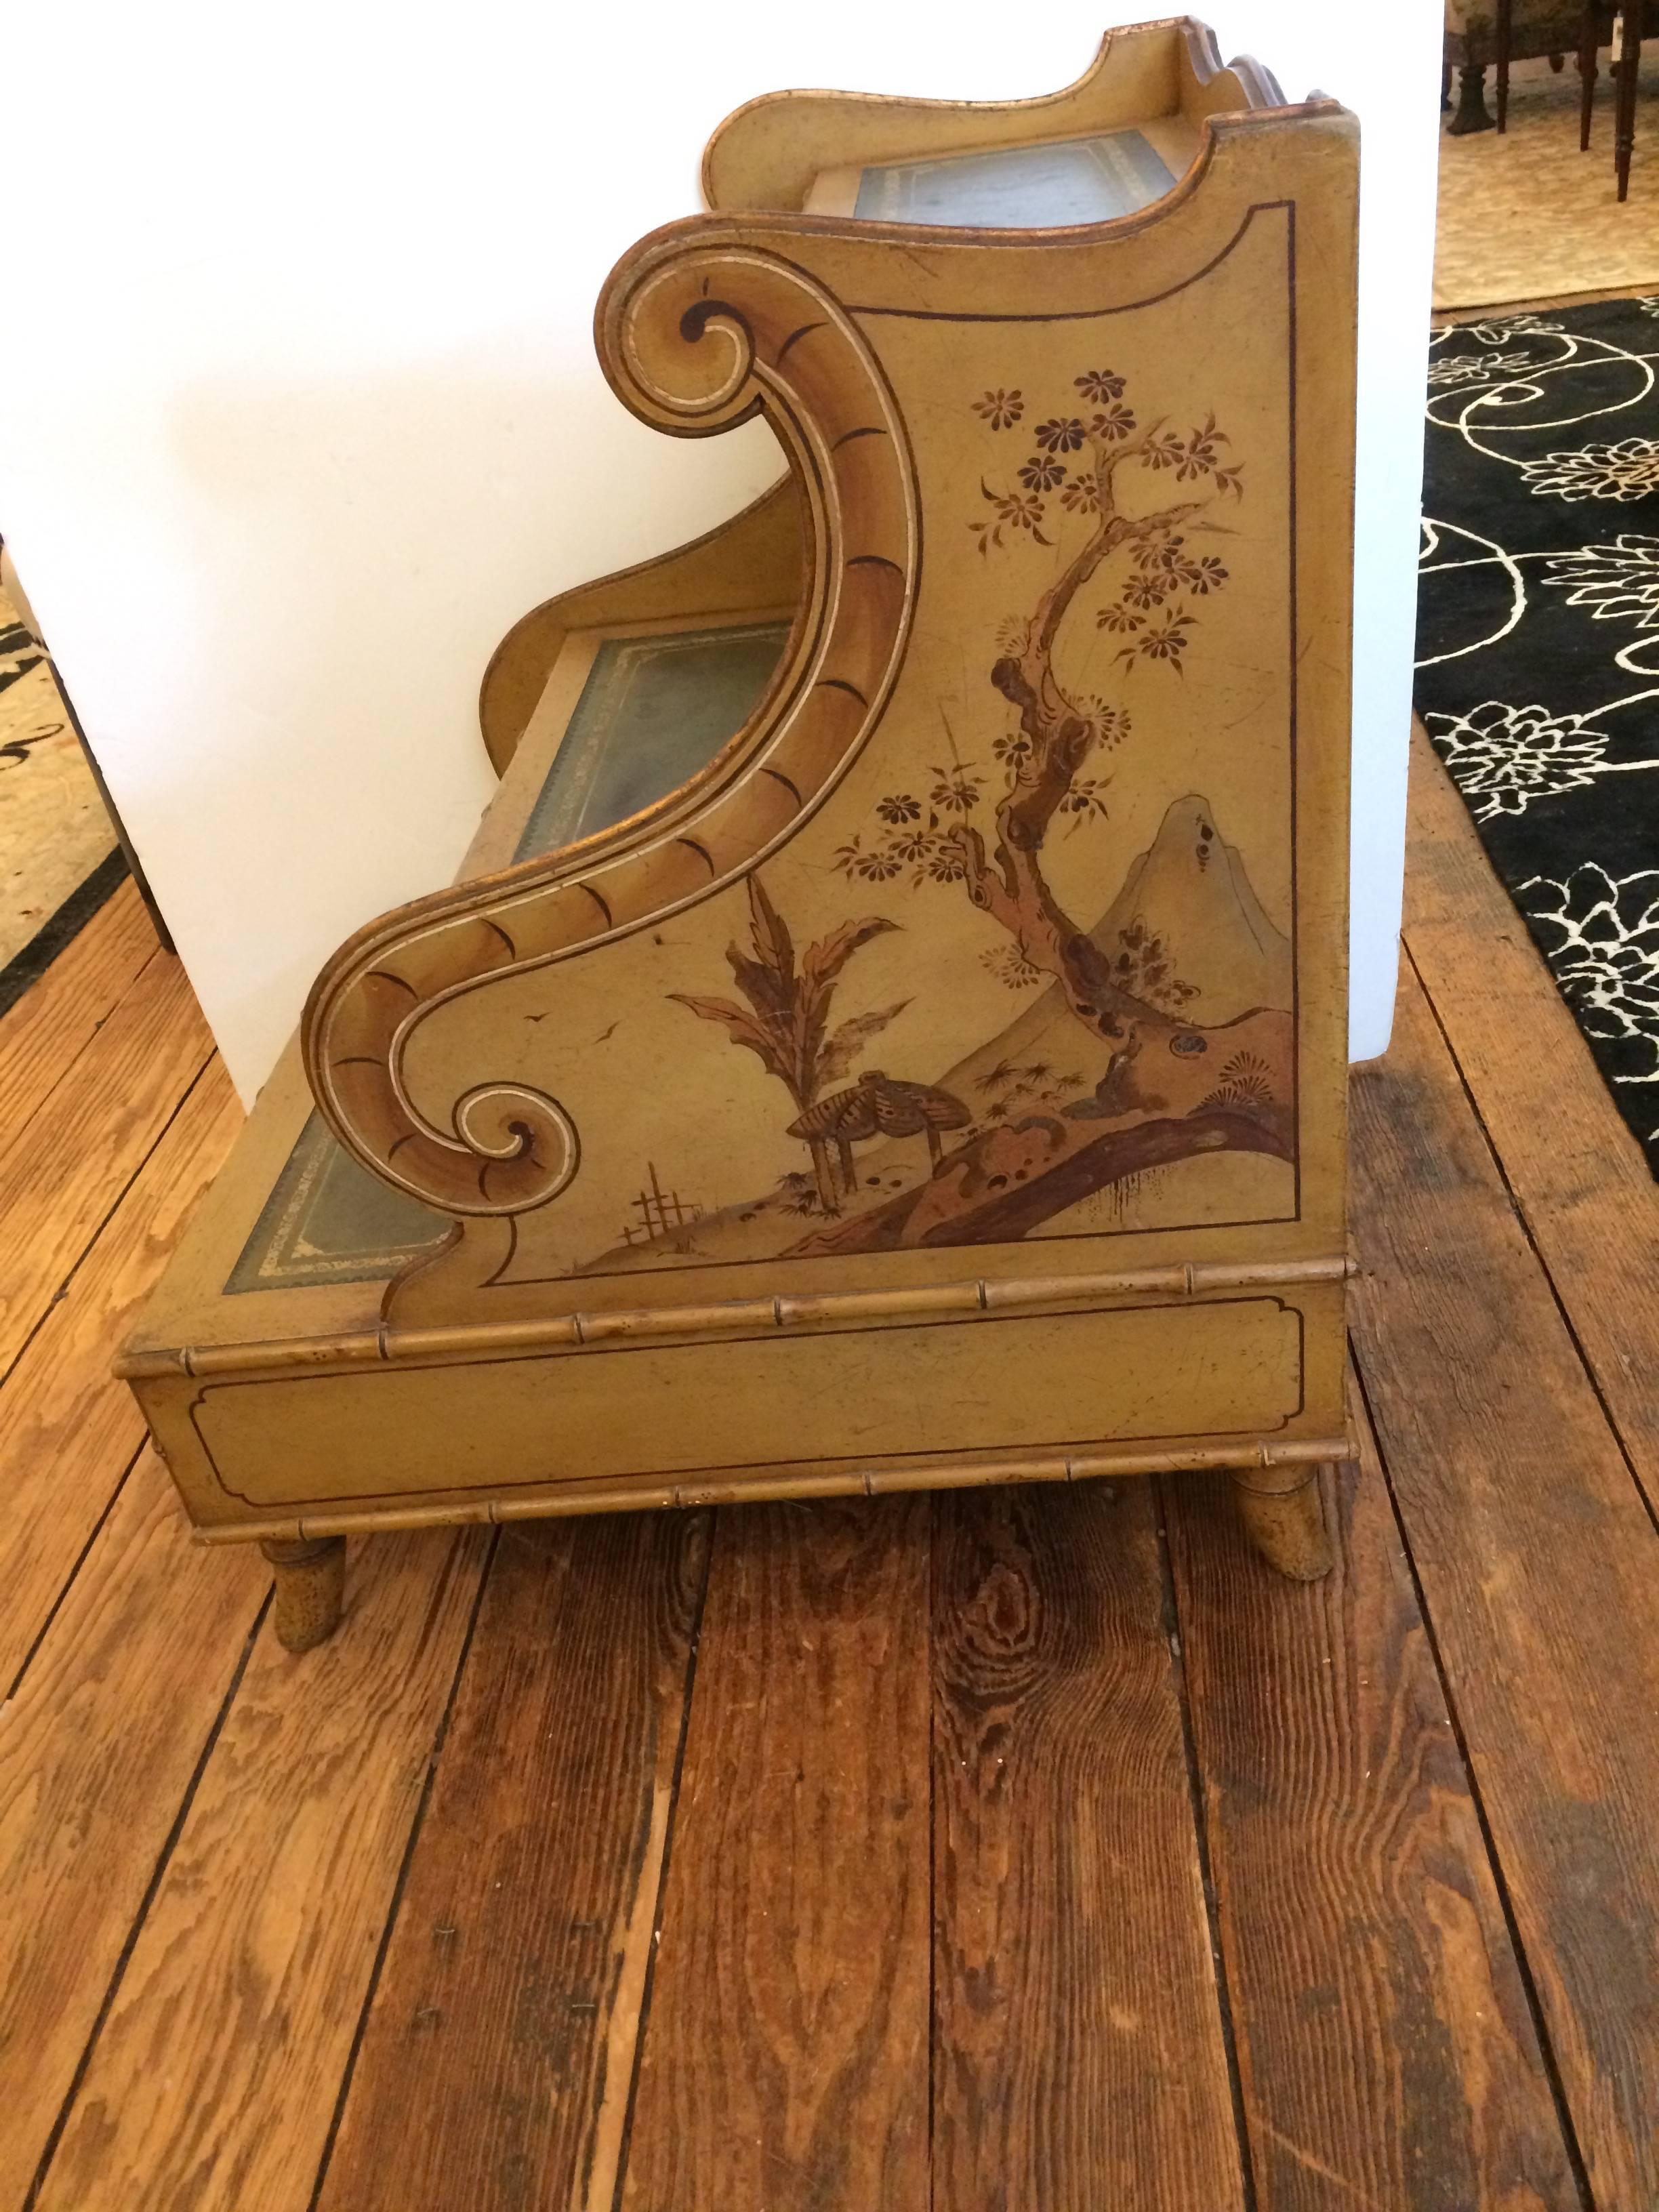 Vintage and rare beautiful library steps having hand-painted Asian style decoration with birds and foliage in a gold yellow oxide color and raw umber, with olive green tooled leather steps and two working drawers. Gorgeous from every angle so